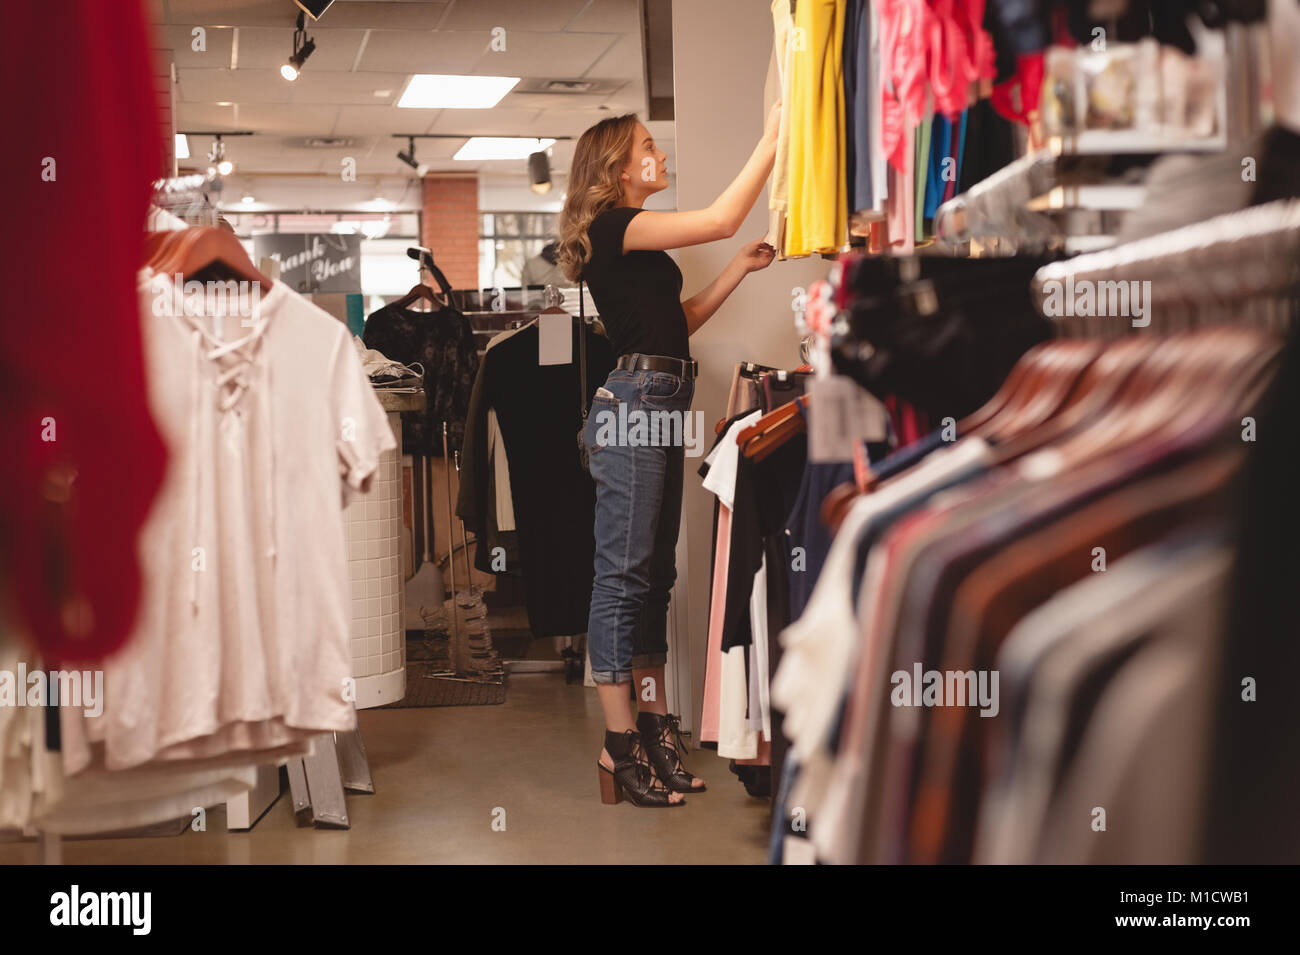 Belle woman shopping for clothes Banque D'Images